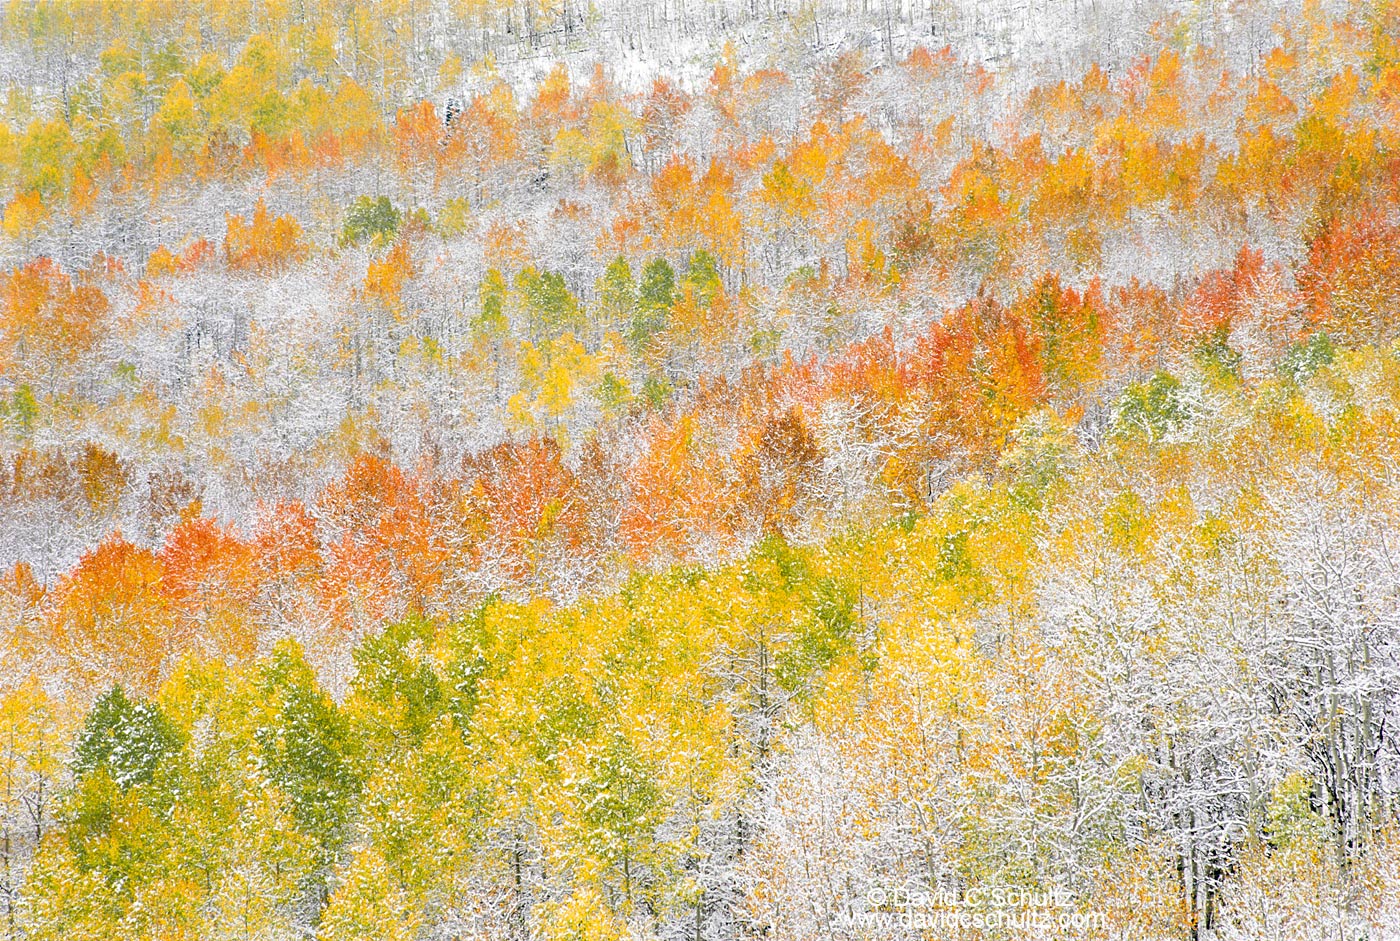 Snow covered aspen trees, Wasatch Mountains, Utah - Image #3-830